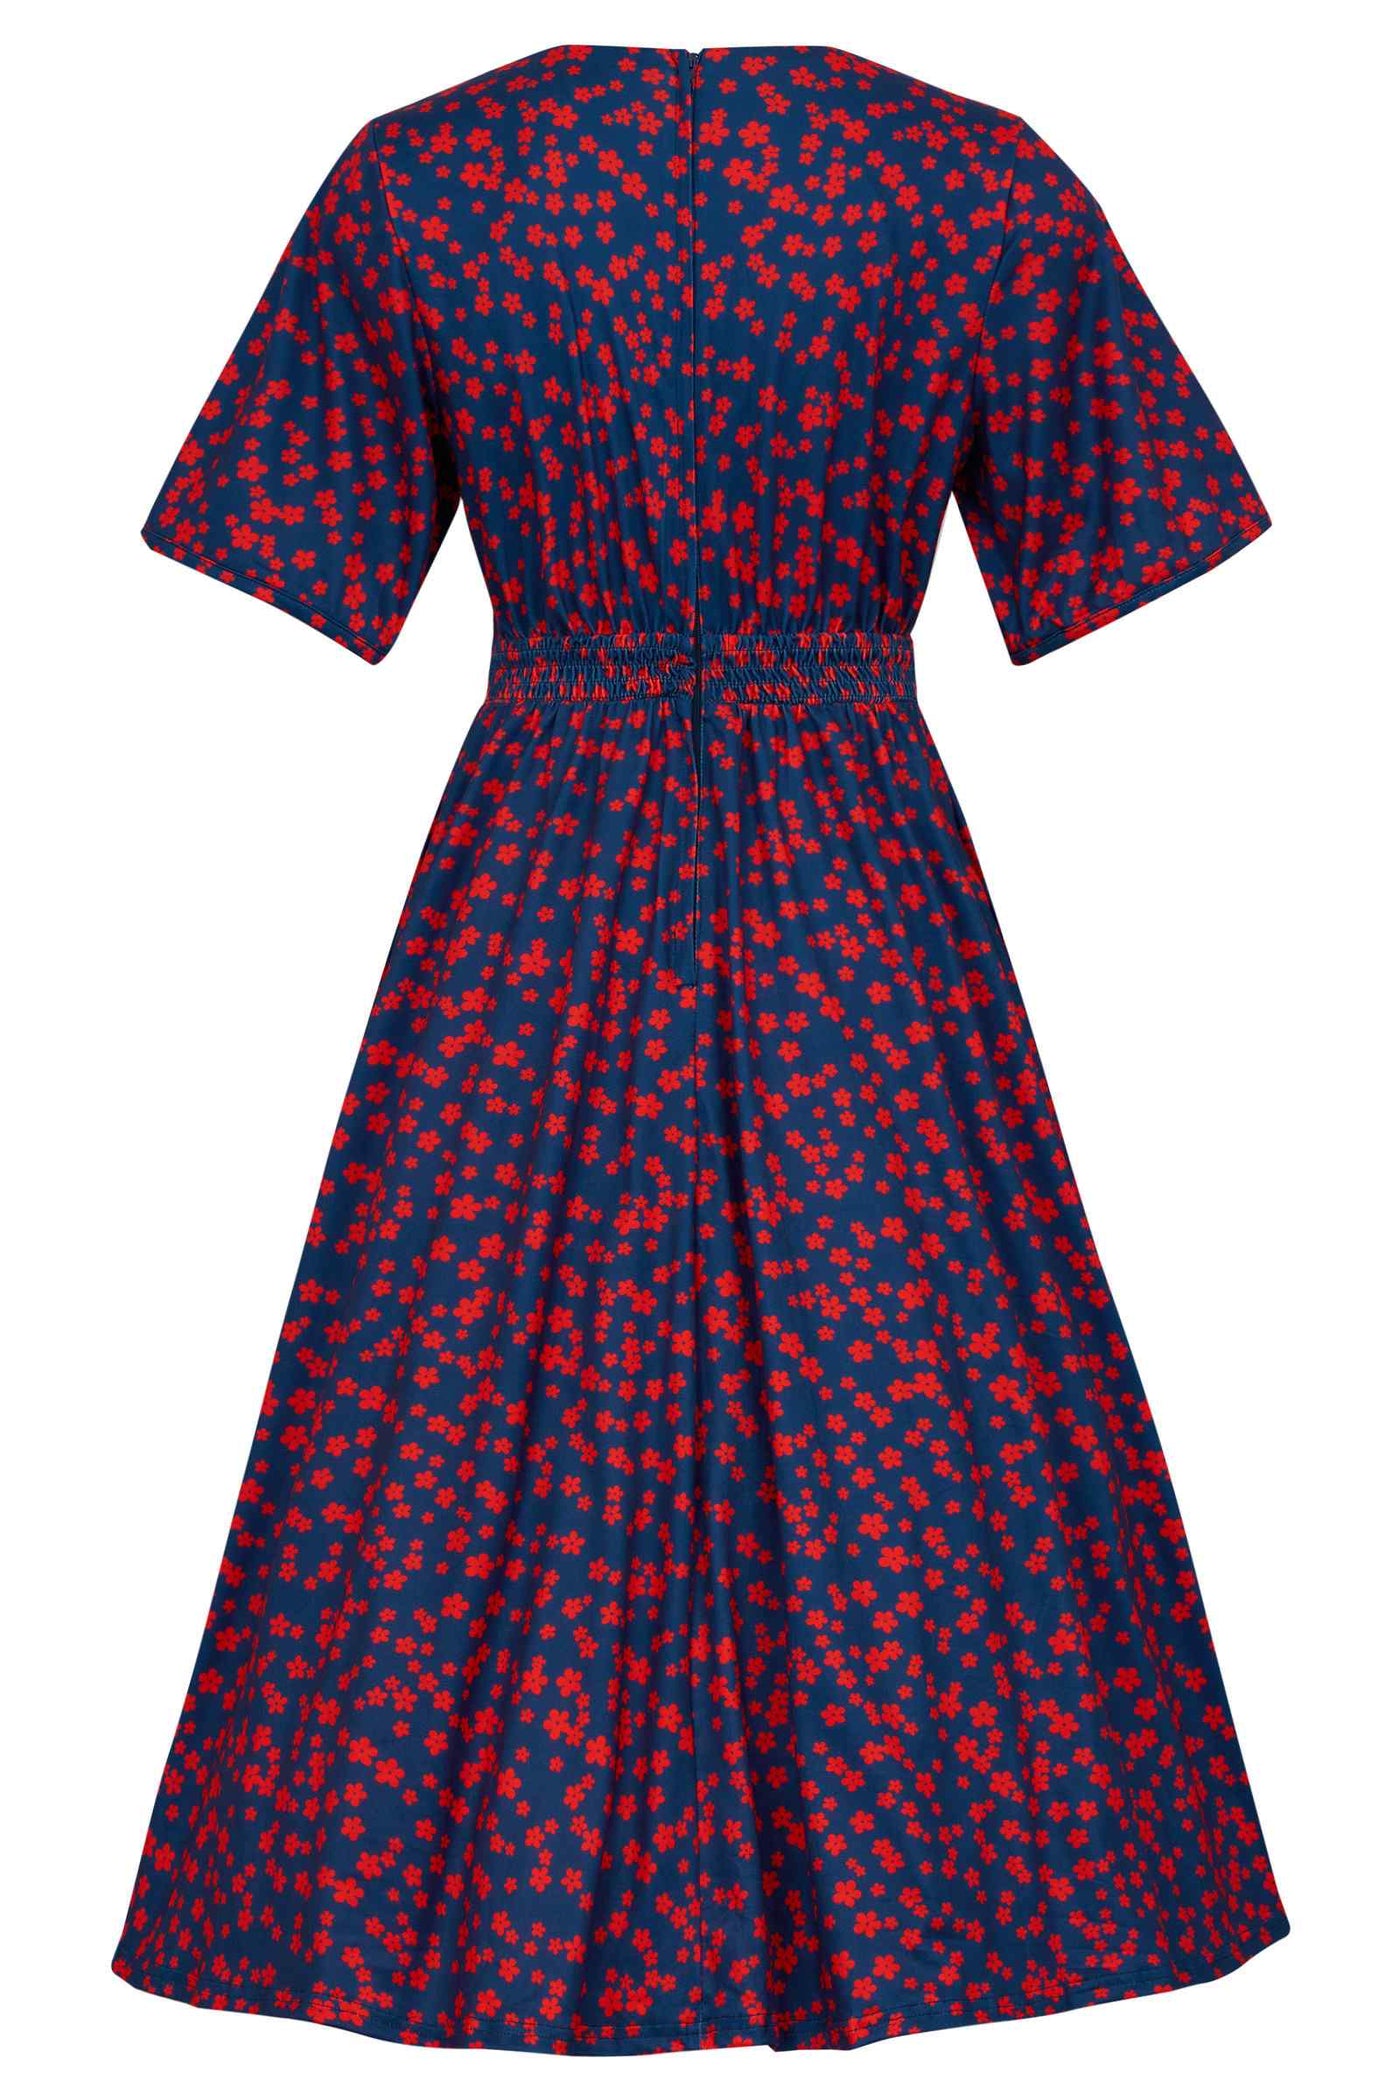 Back View of Red Ditsy Floral Petal Print Sleeve Dress in Navy Blue